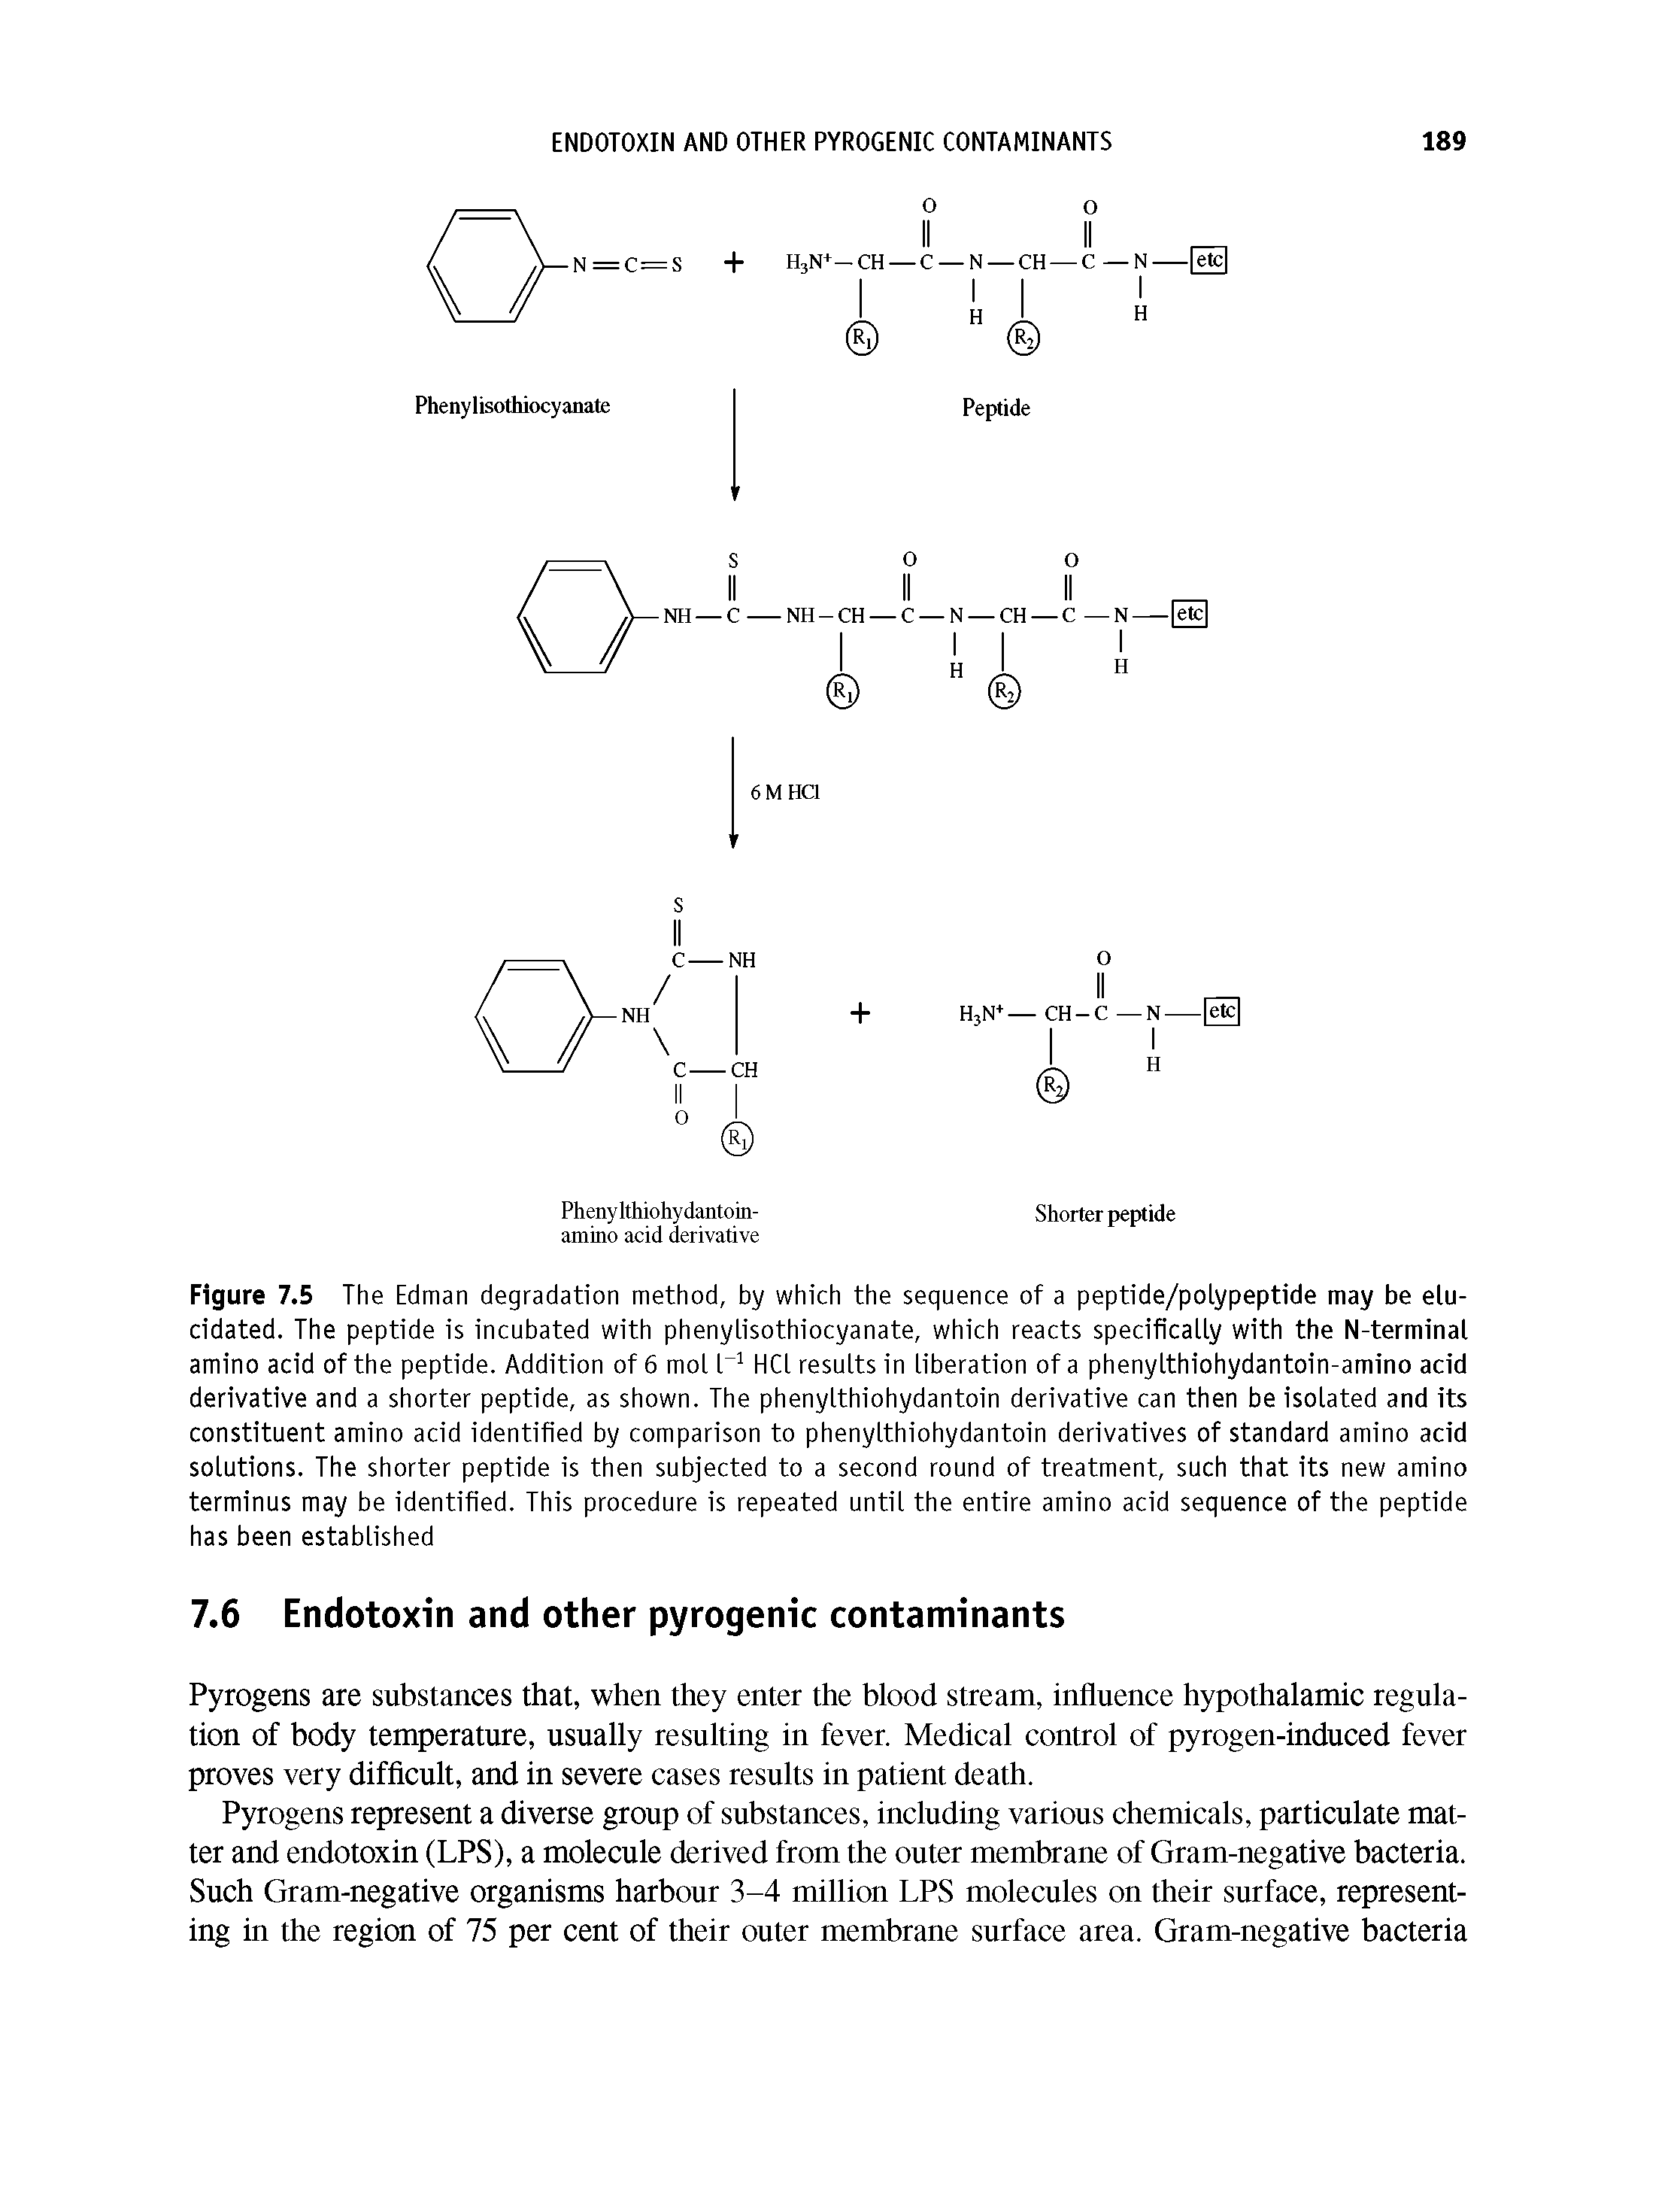 Figure 7.5 The Edman degradation method, by which the sequence of a peptide/polypeptide may be elucidated. The peptide is incubated with phenylisothiocyanate, which reacts specifically with the N-terminal amino acid of the peptide. Addition of 6 mol l-1 HCl results in liberation of a phenylthiohydantoin-amino acid derivative and a shorter peptide, as shown. The phenylthiohydantoin derivative can then be isolated and its constituent amino acid identified by comparison to phenylthiohydantoin derivatives of standard amino acid solutions. The shorter peptide is then subjected to a second round of treatment, such that its new amino terminus may be identified. This procedure is repeated until the entire amino acid sequence of the peptide has been established...